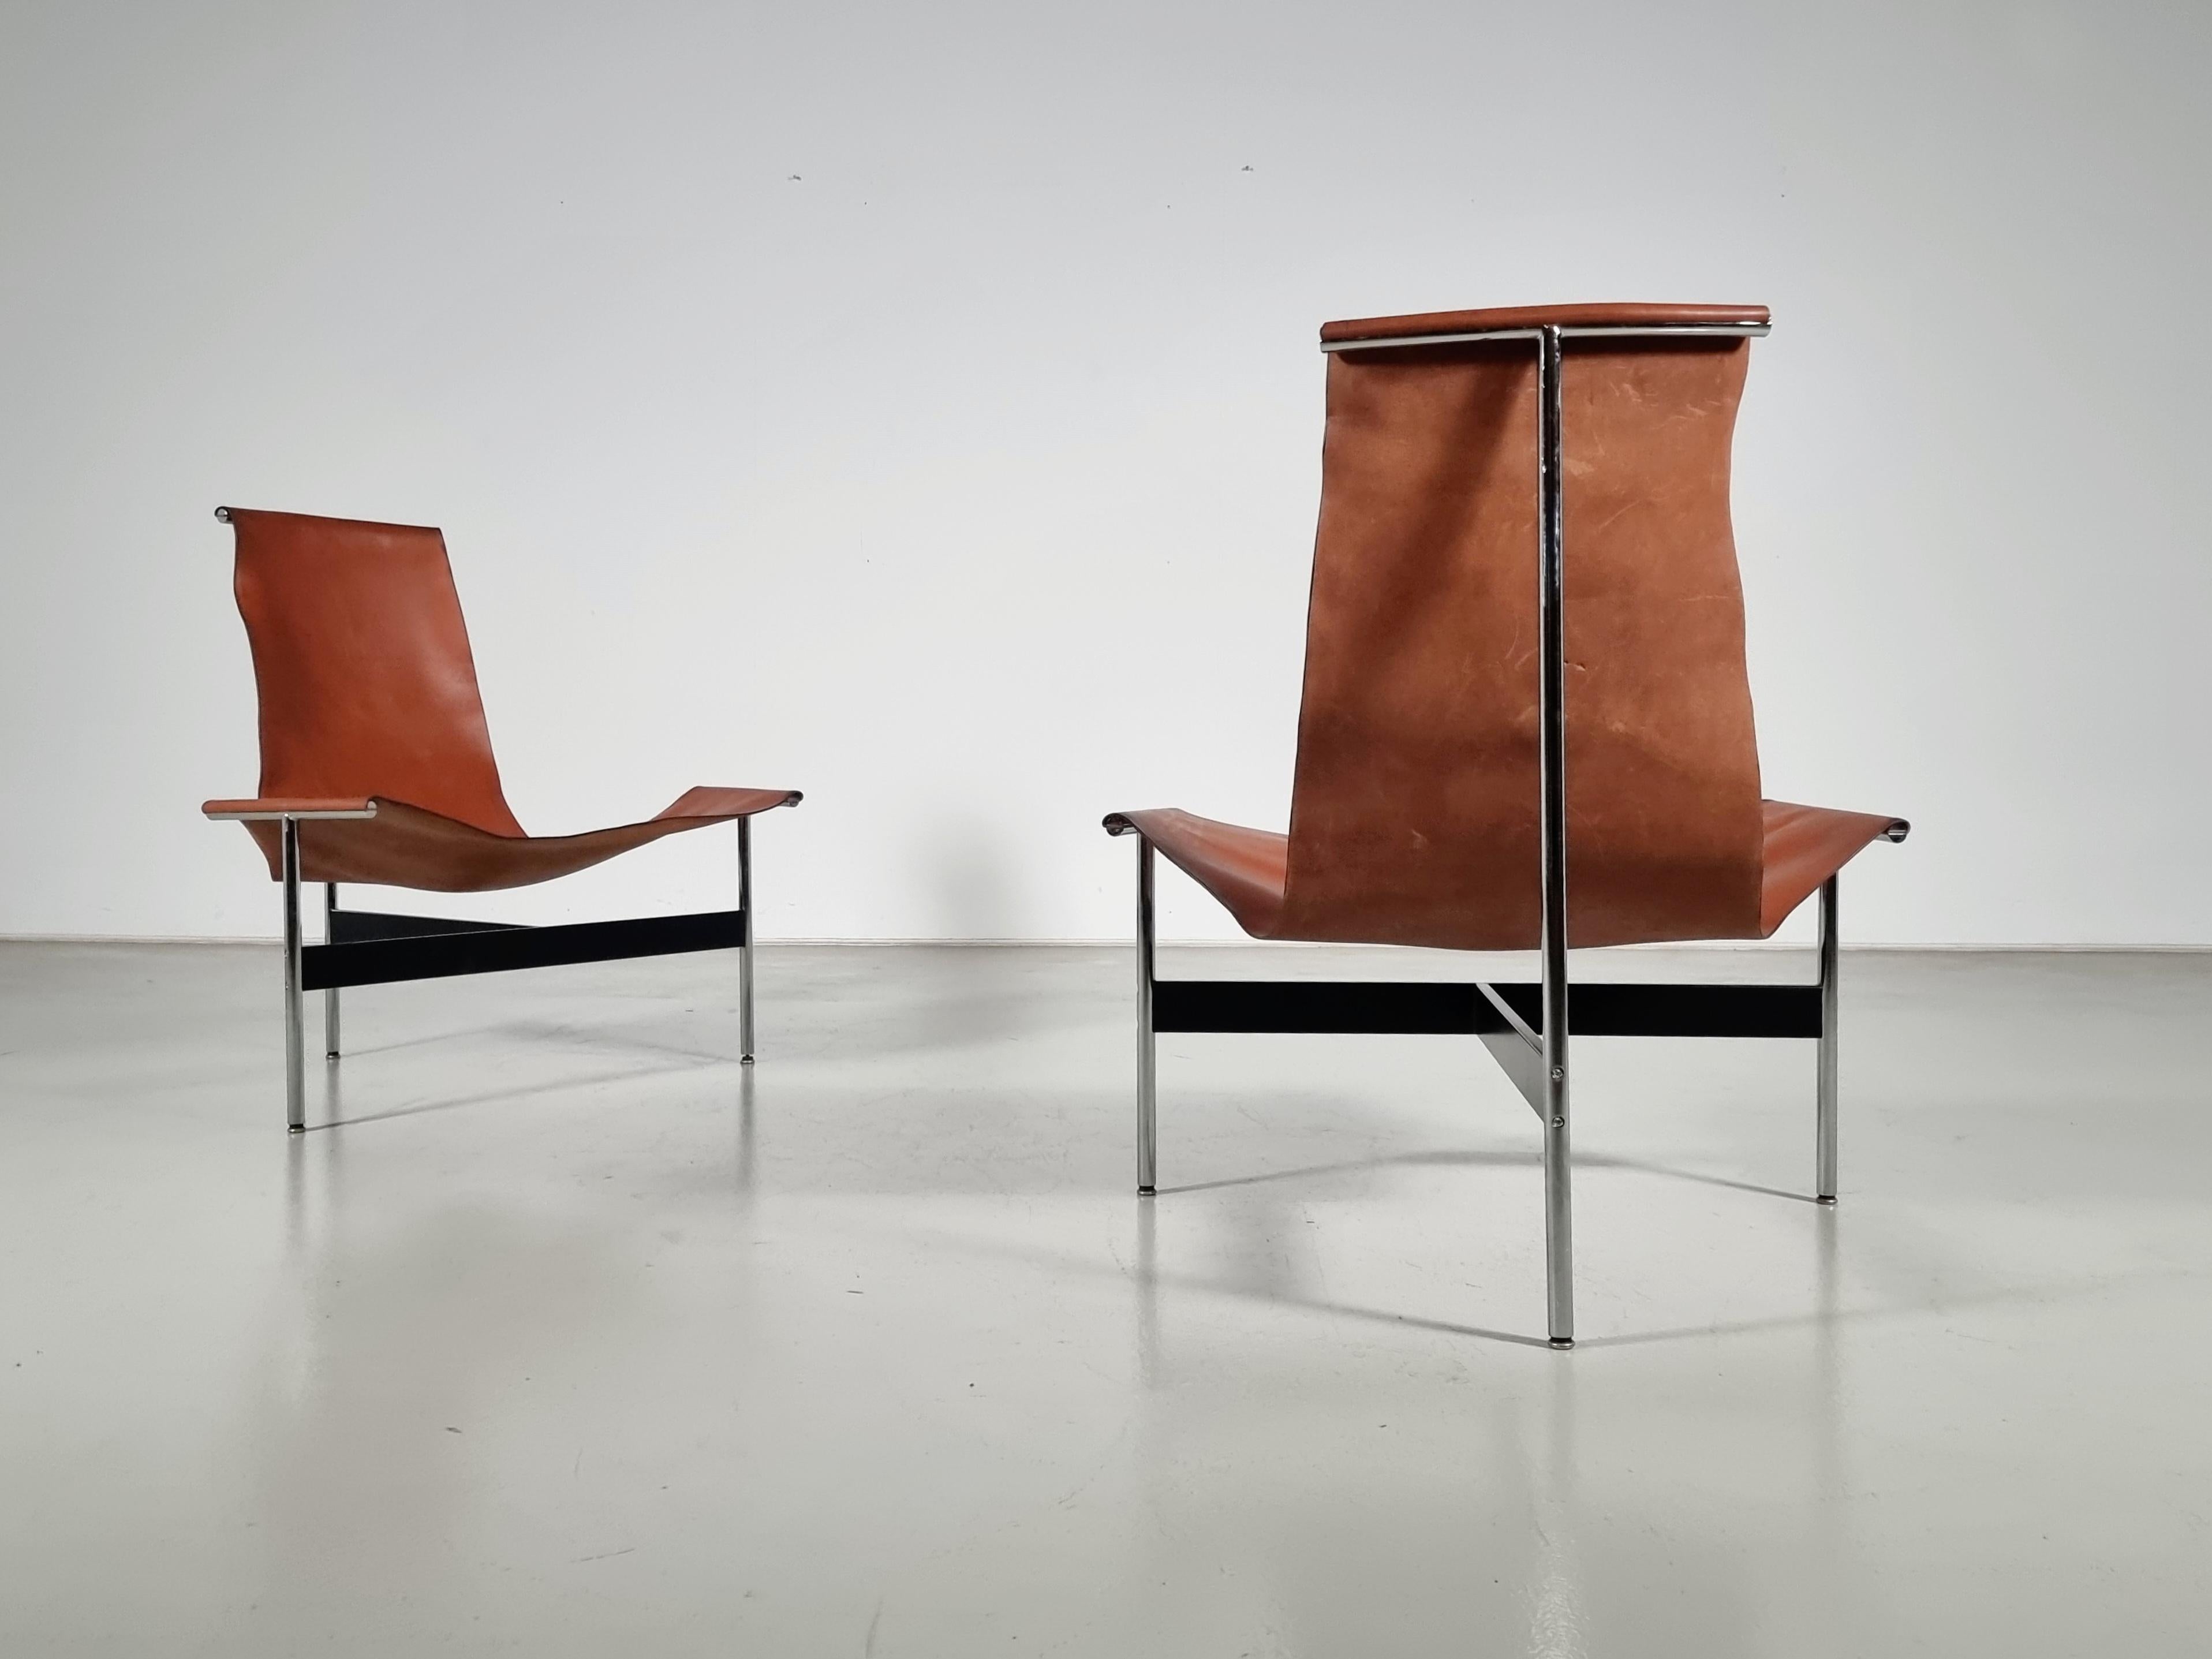 '3LC' T-Chairs by Katavolos, Littell and Kelley for Laverne International, 1950s In Good Condition For Sale In amstelveen, NL